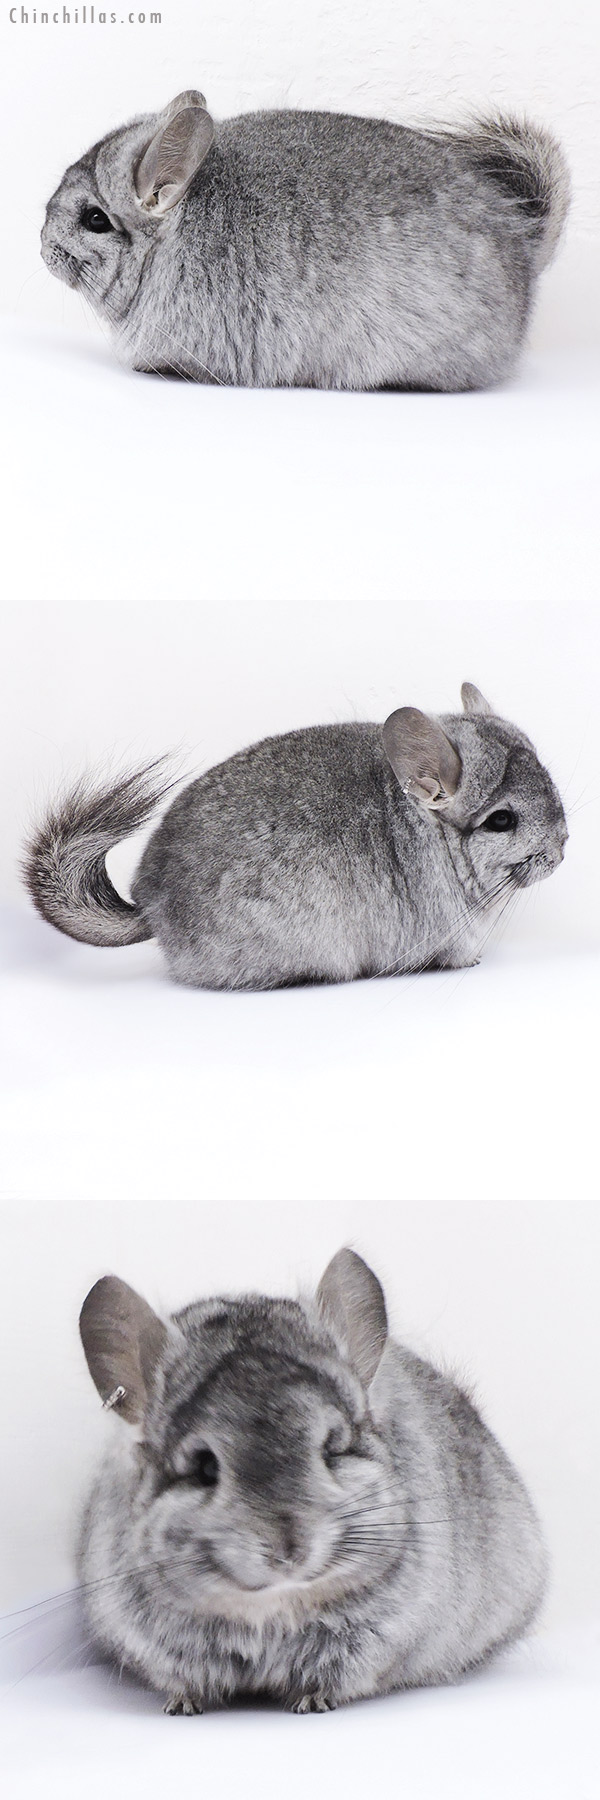 Chinchilla or related item offered for sale or export on Chinchillas.com - 19092 Blocky Standard ( Ebony & Locken Carrier )  Royal Persian Angora Female Chinchilla